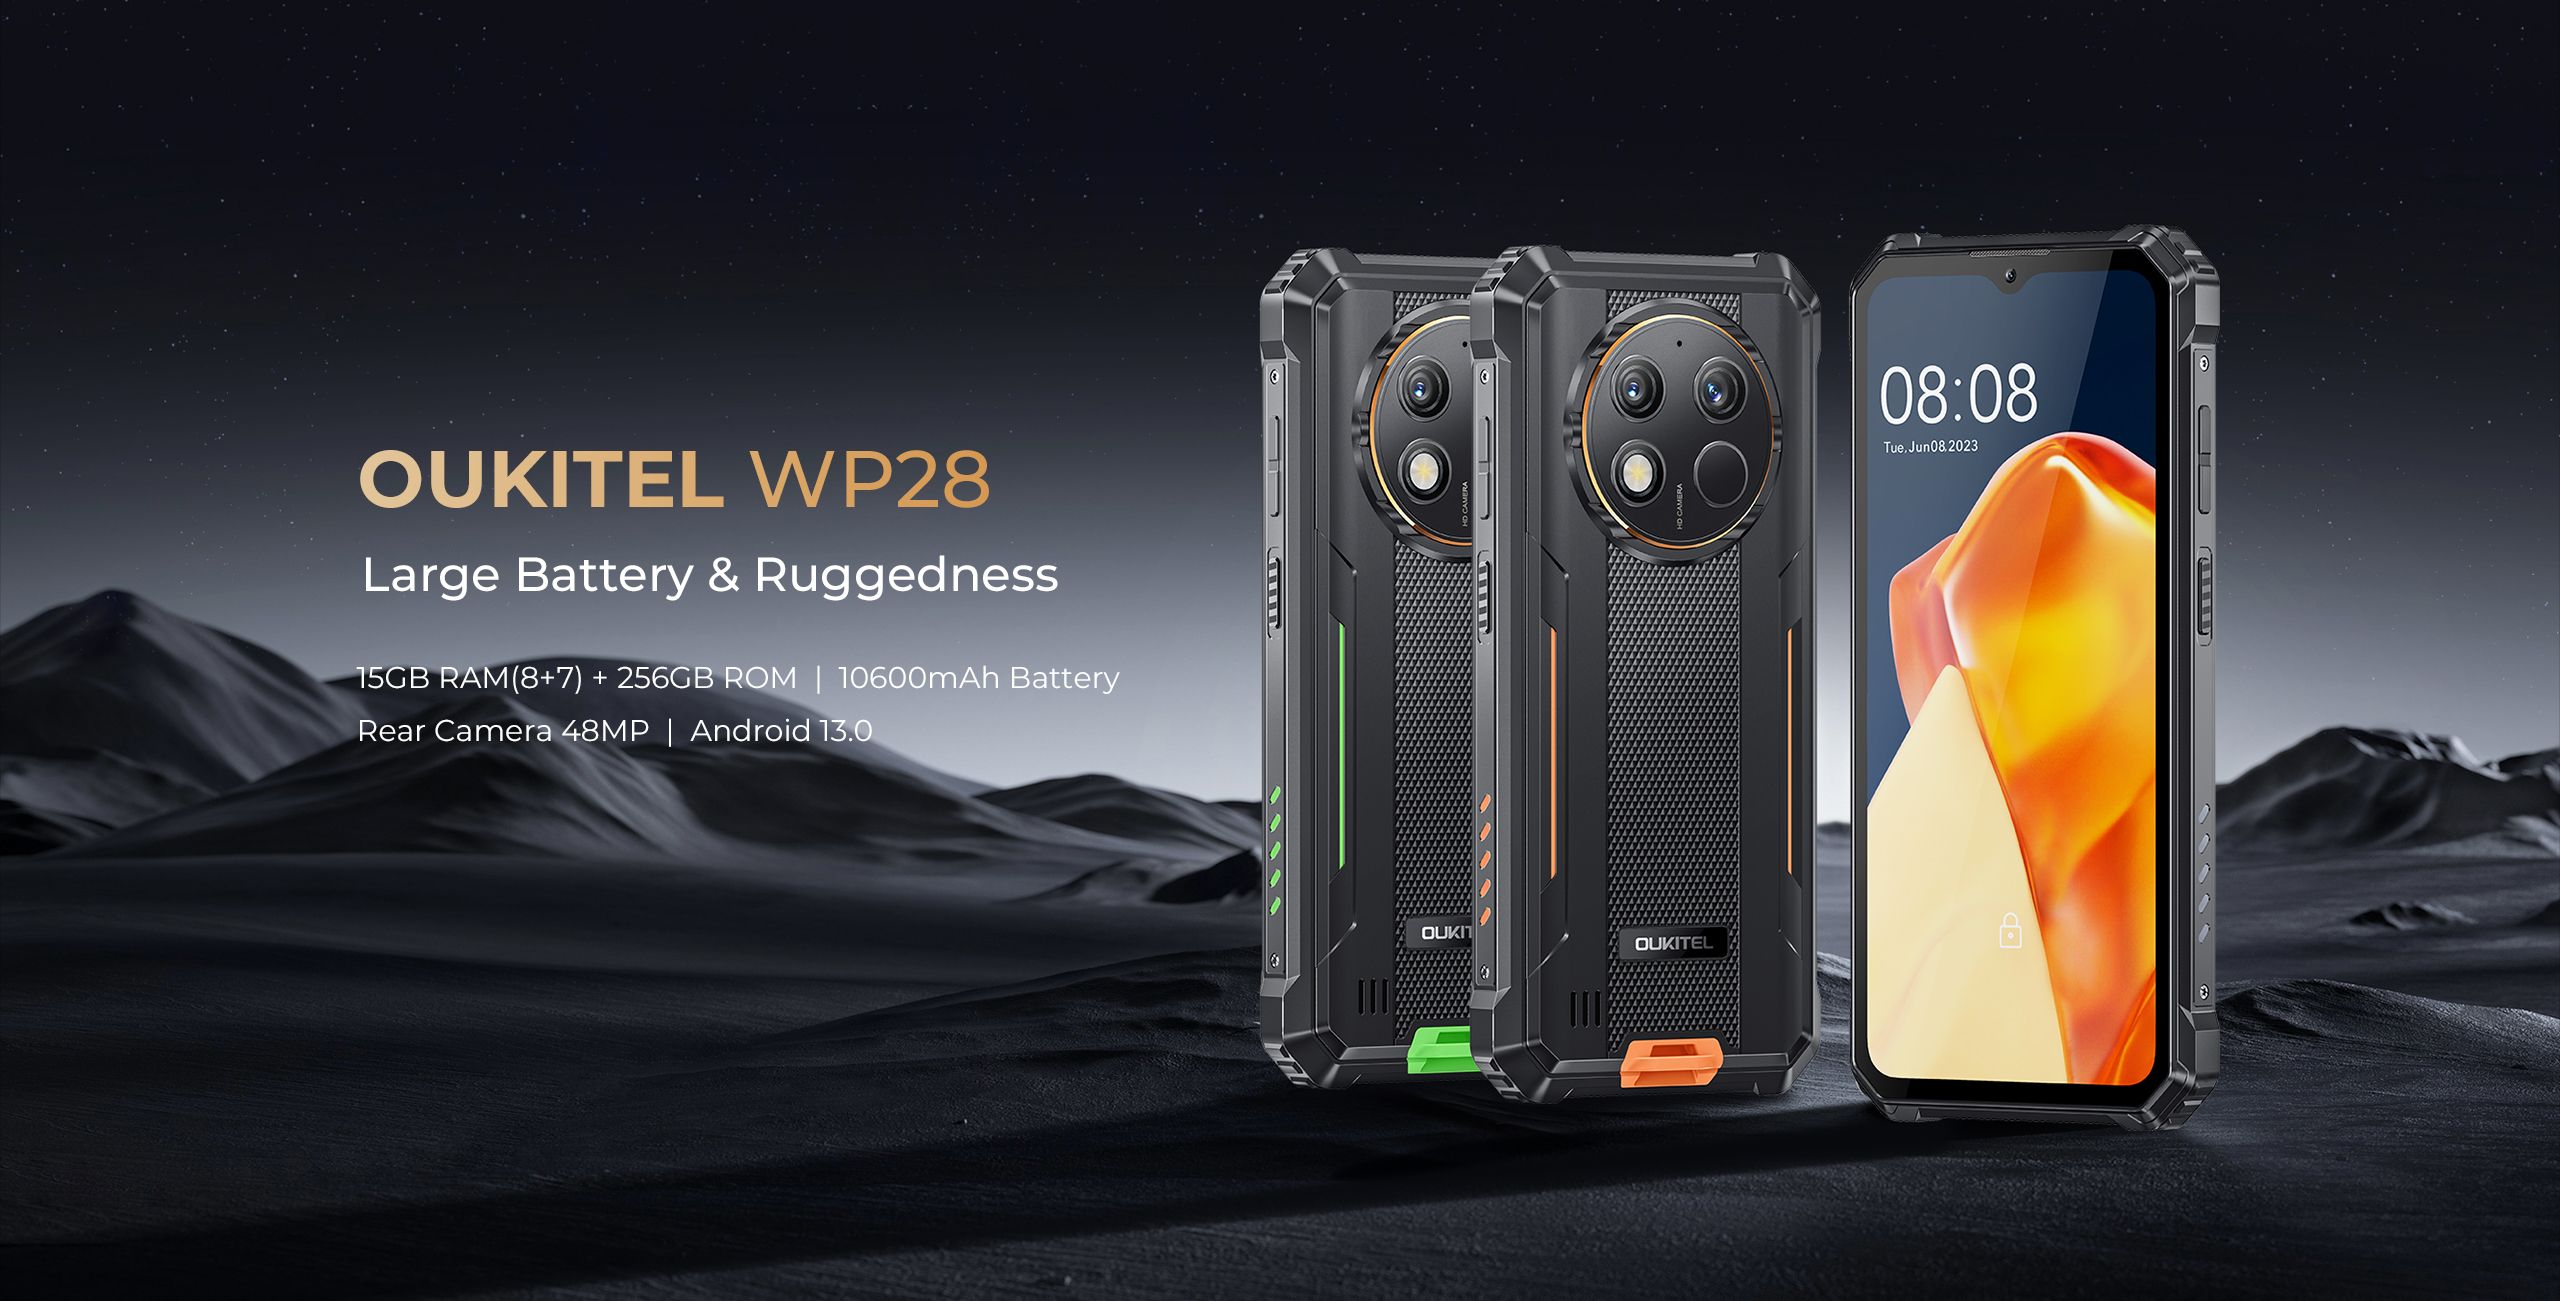 Oukitel's Back to School sale slashes prices for the RT6 and WP28